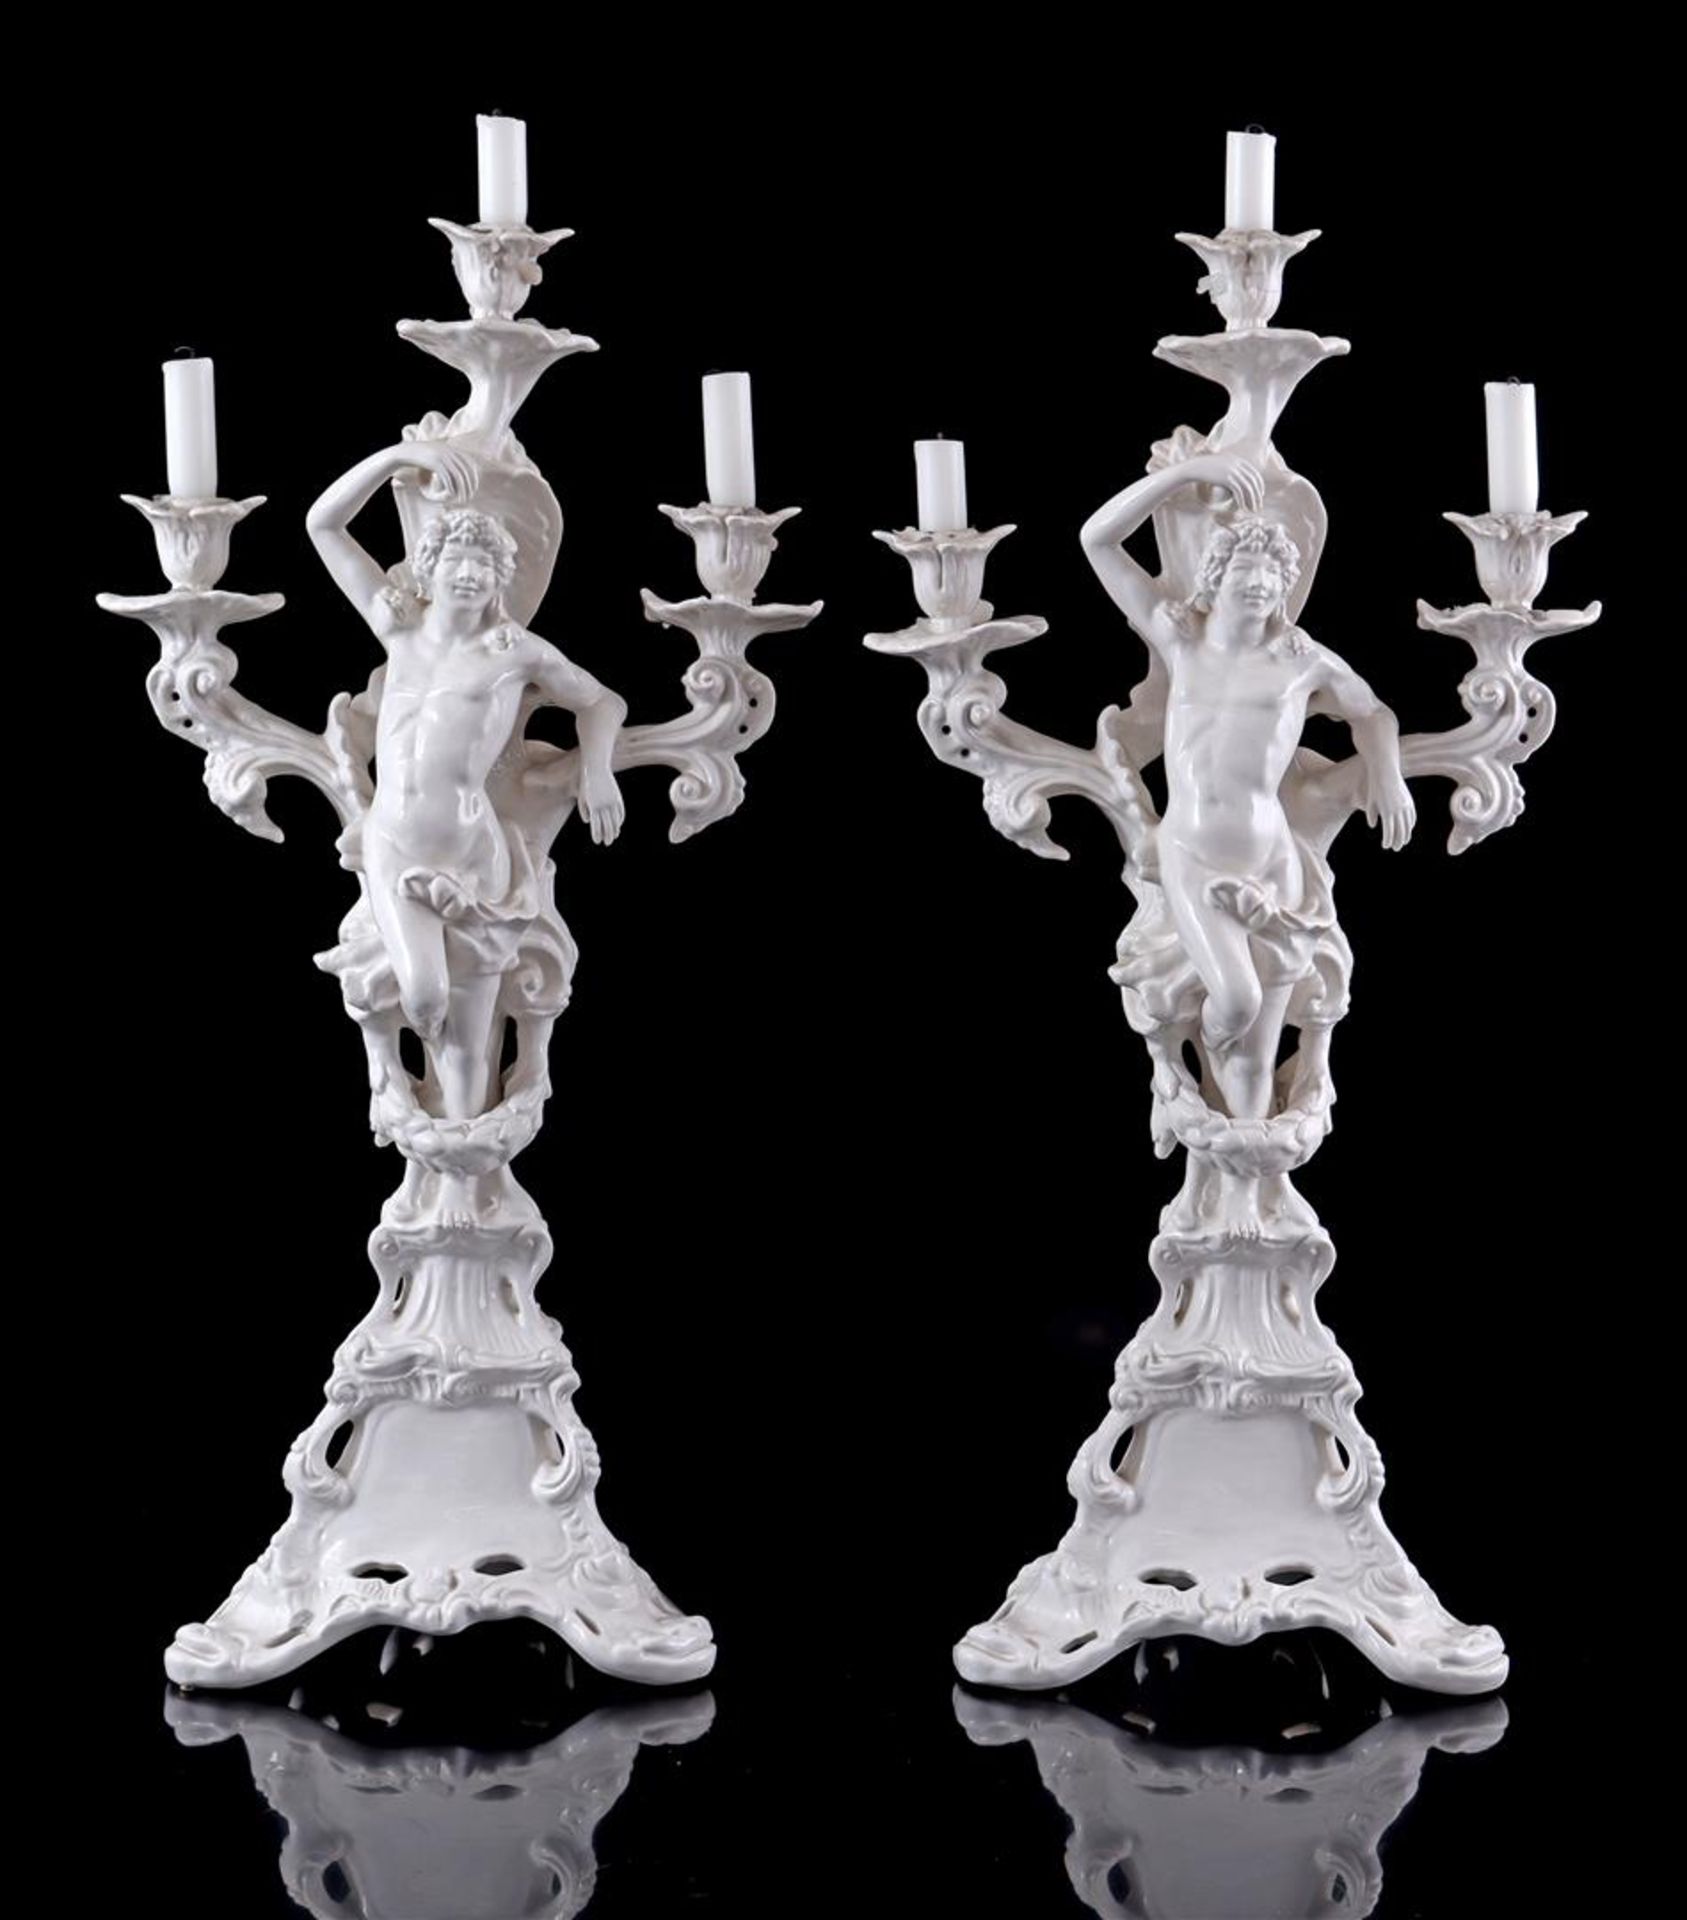 2 candlesticks in Rococo style